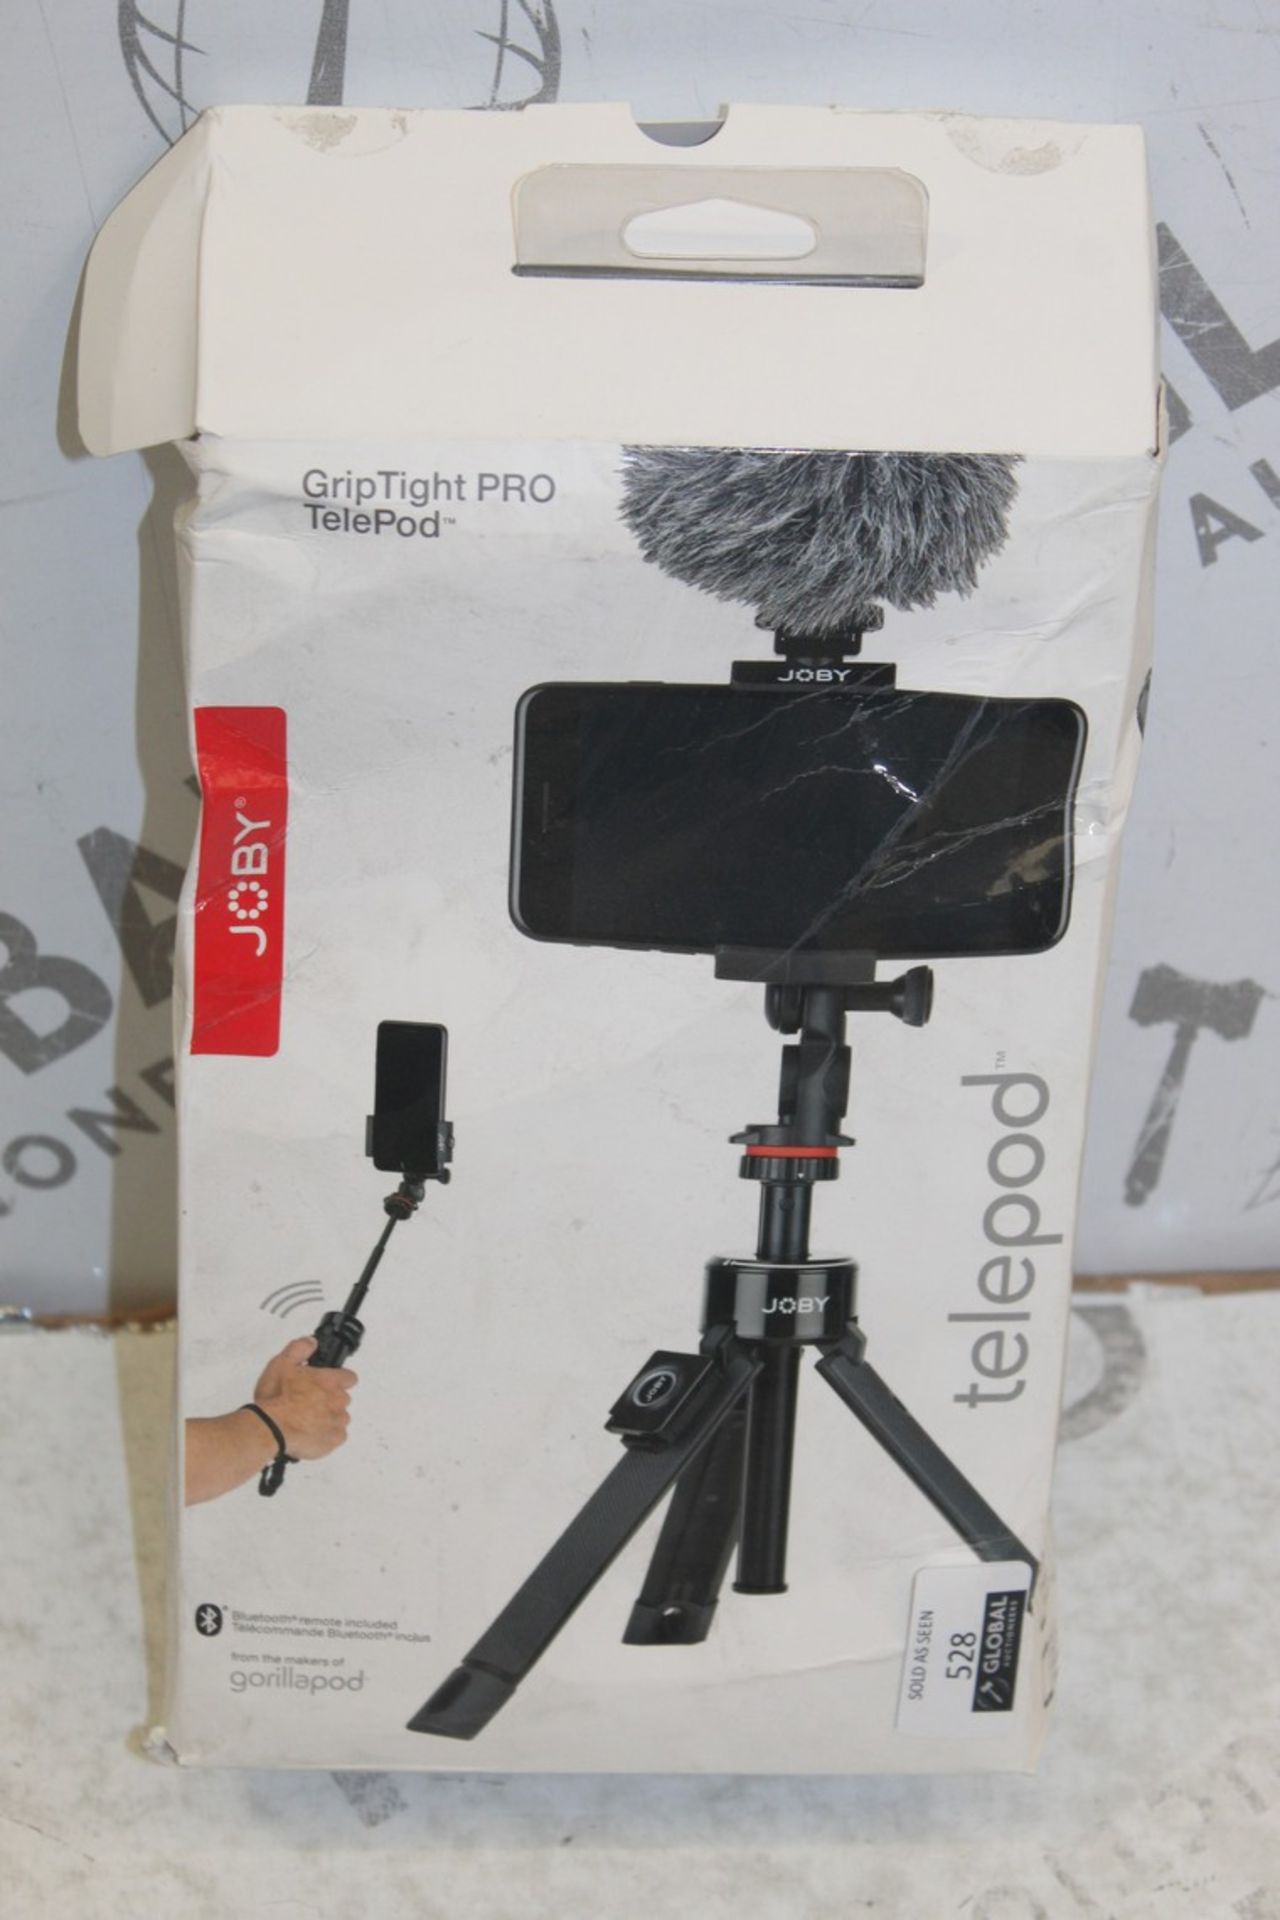 Boxed Joby Grip Tight Pro Telepod Tripod RRP £100 (Appraisals Are Available Upon Request)(Pictures